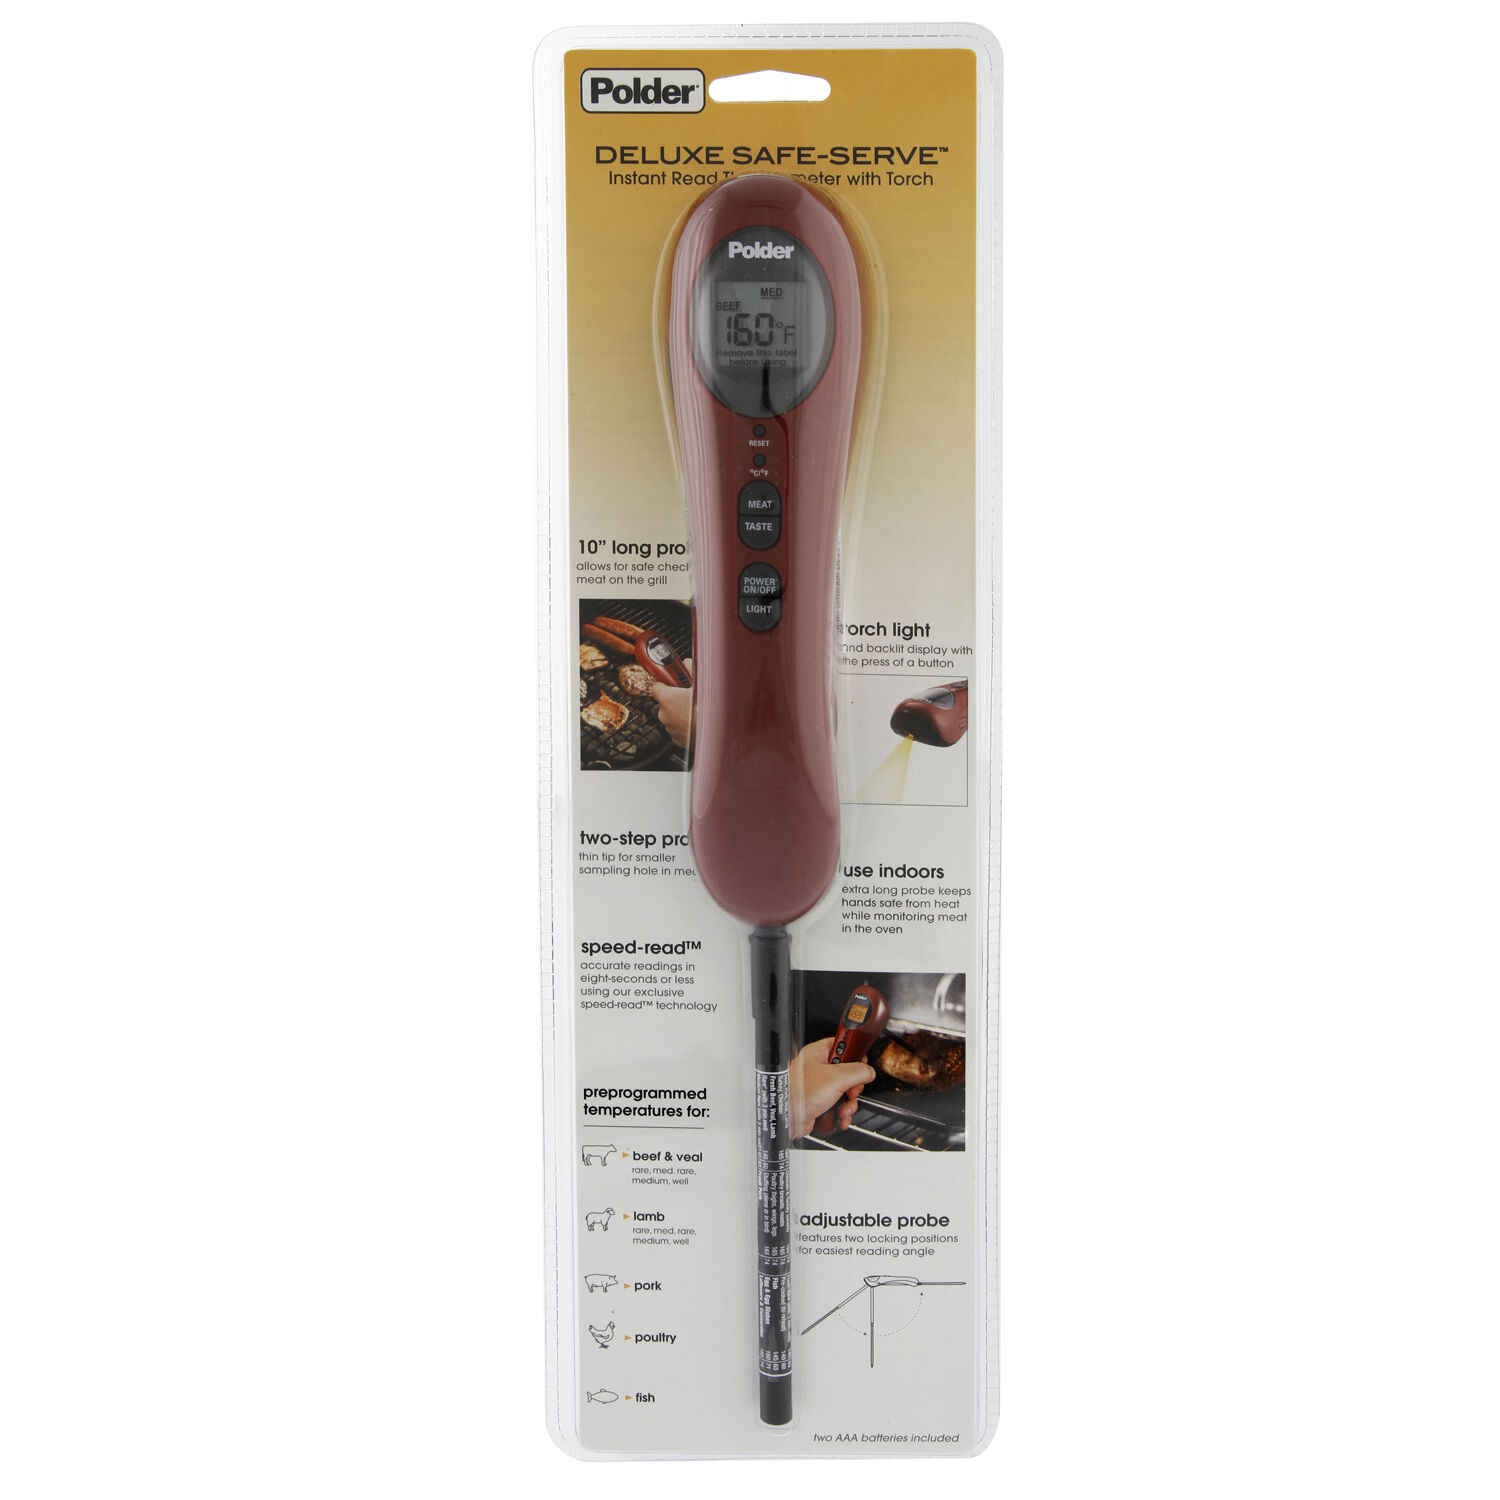 Brand New Polder Deluxe Safe-Serve Instant Read Thermometer